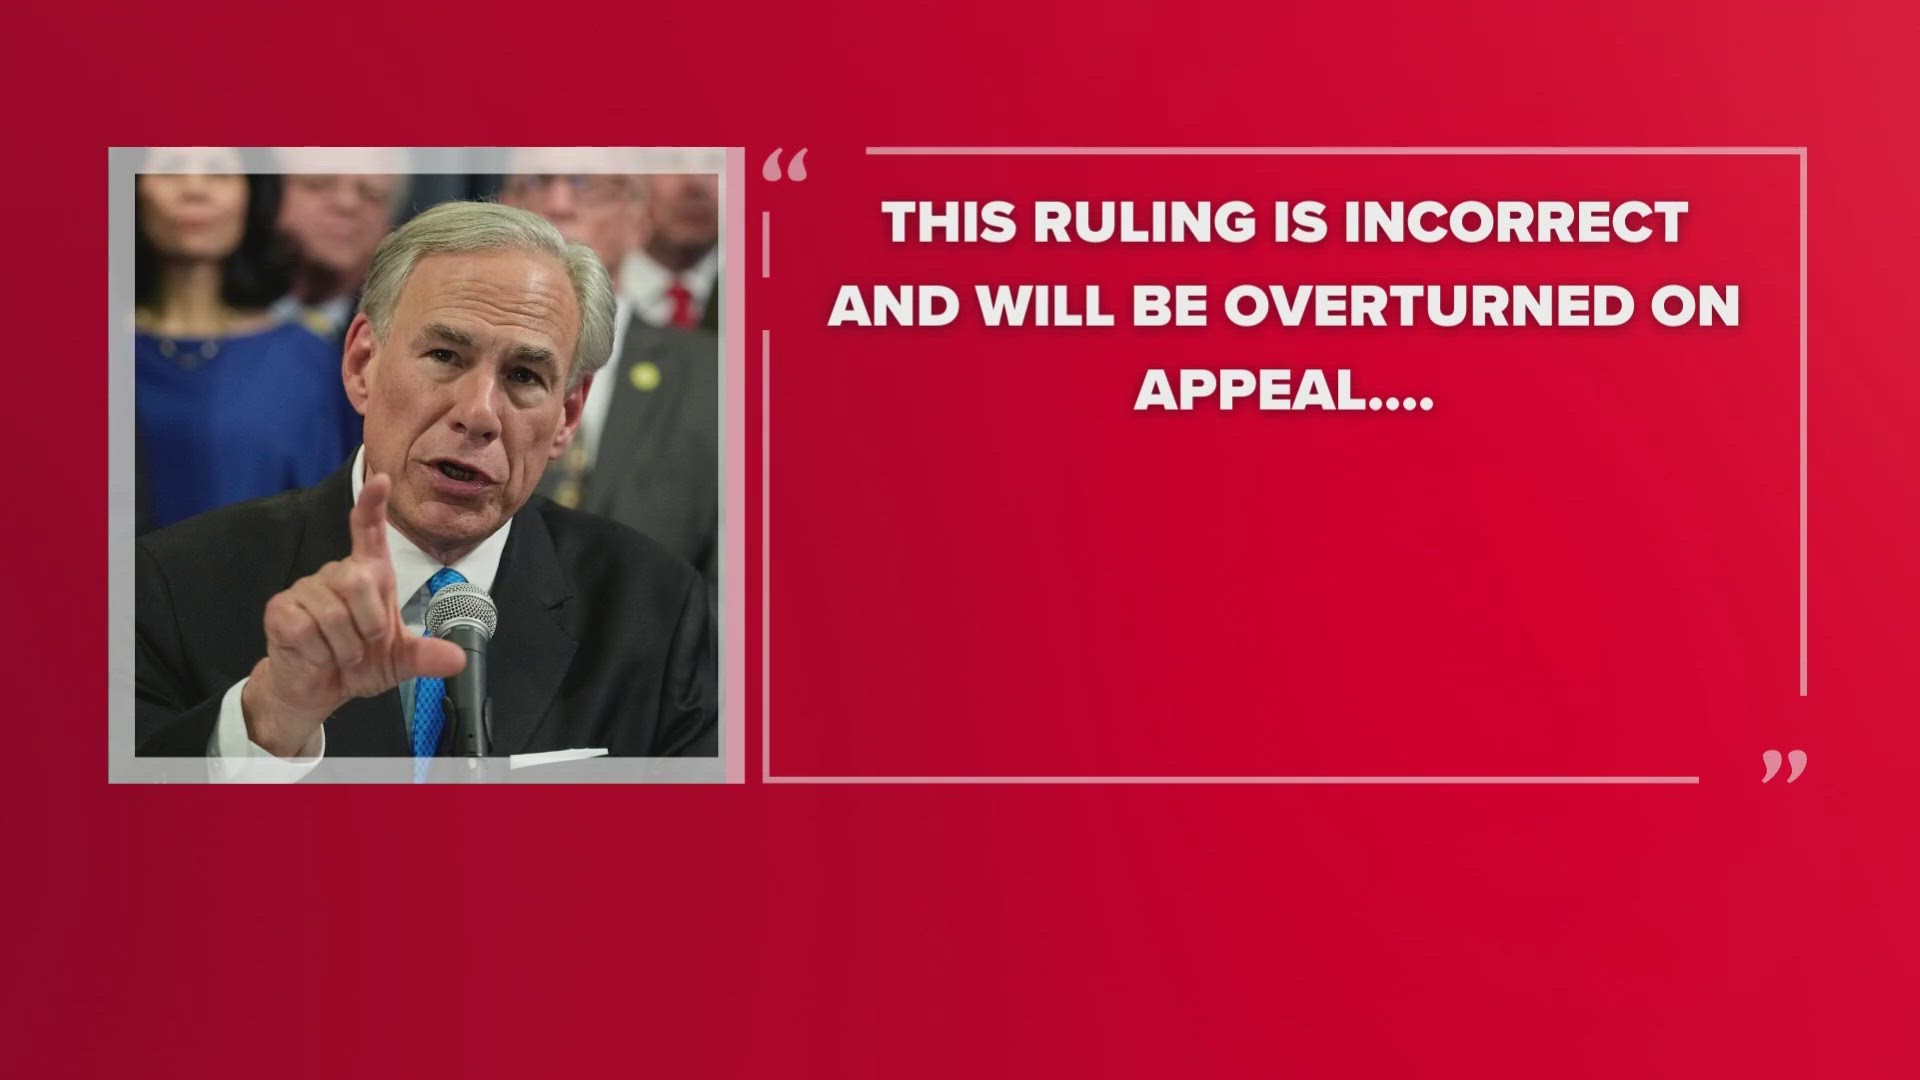 Gov. Greg Abbott said almost immediately that Texas will appeal the ruling.